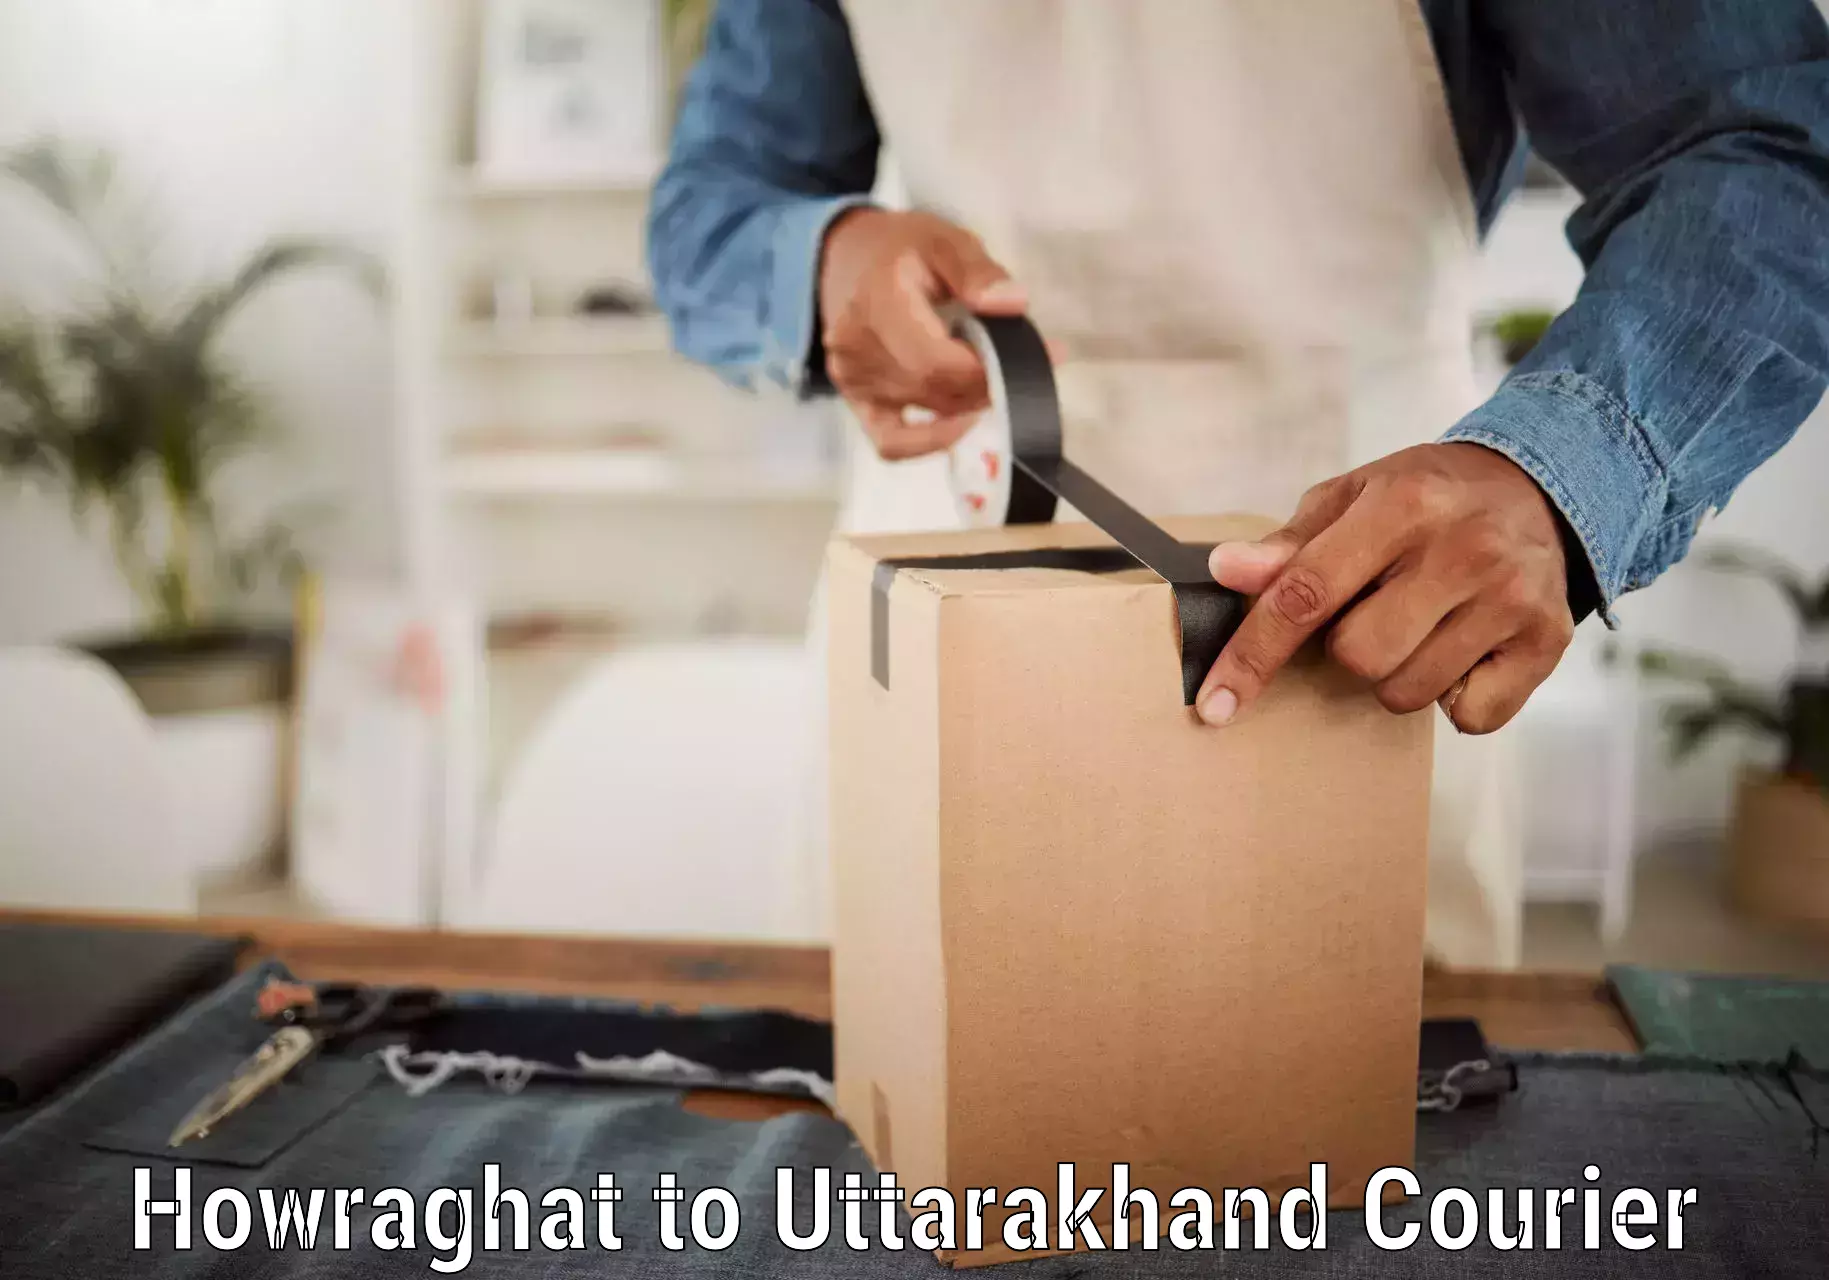 Professional courier handling Howraghat to Bhagwanpur